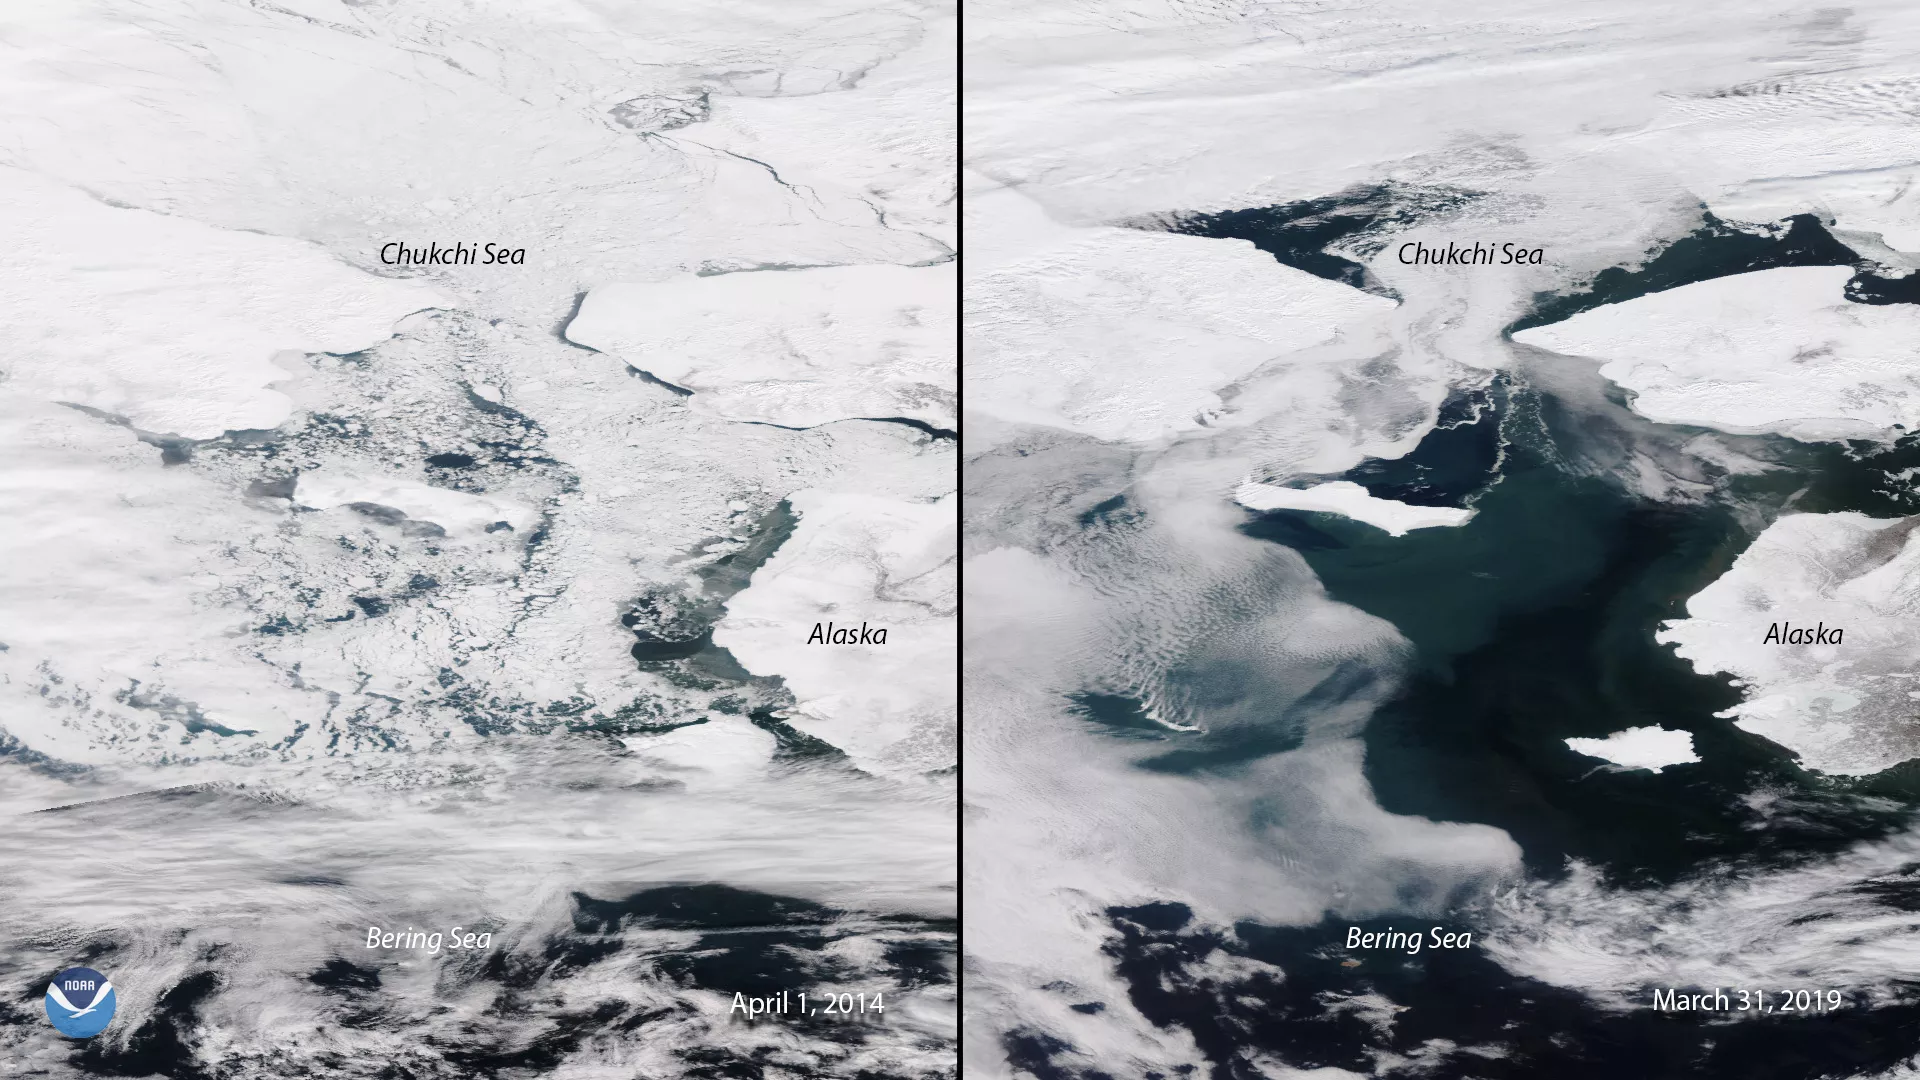 Side-by-side satellite imagery of the Bering Sea taken in spring of 2014 and 2019 shows a drastic change in sea ice extent